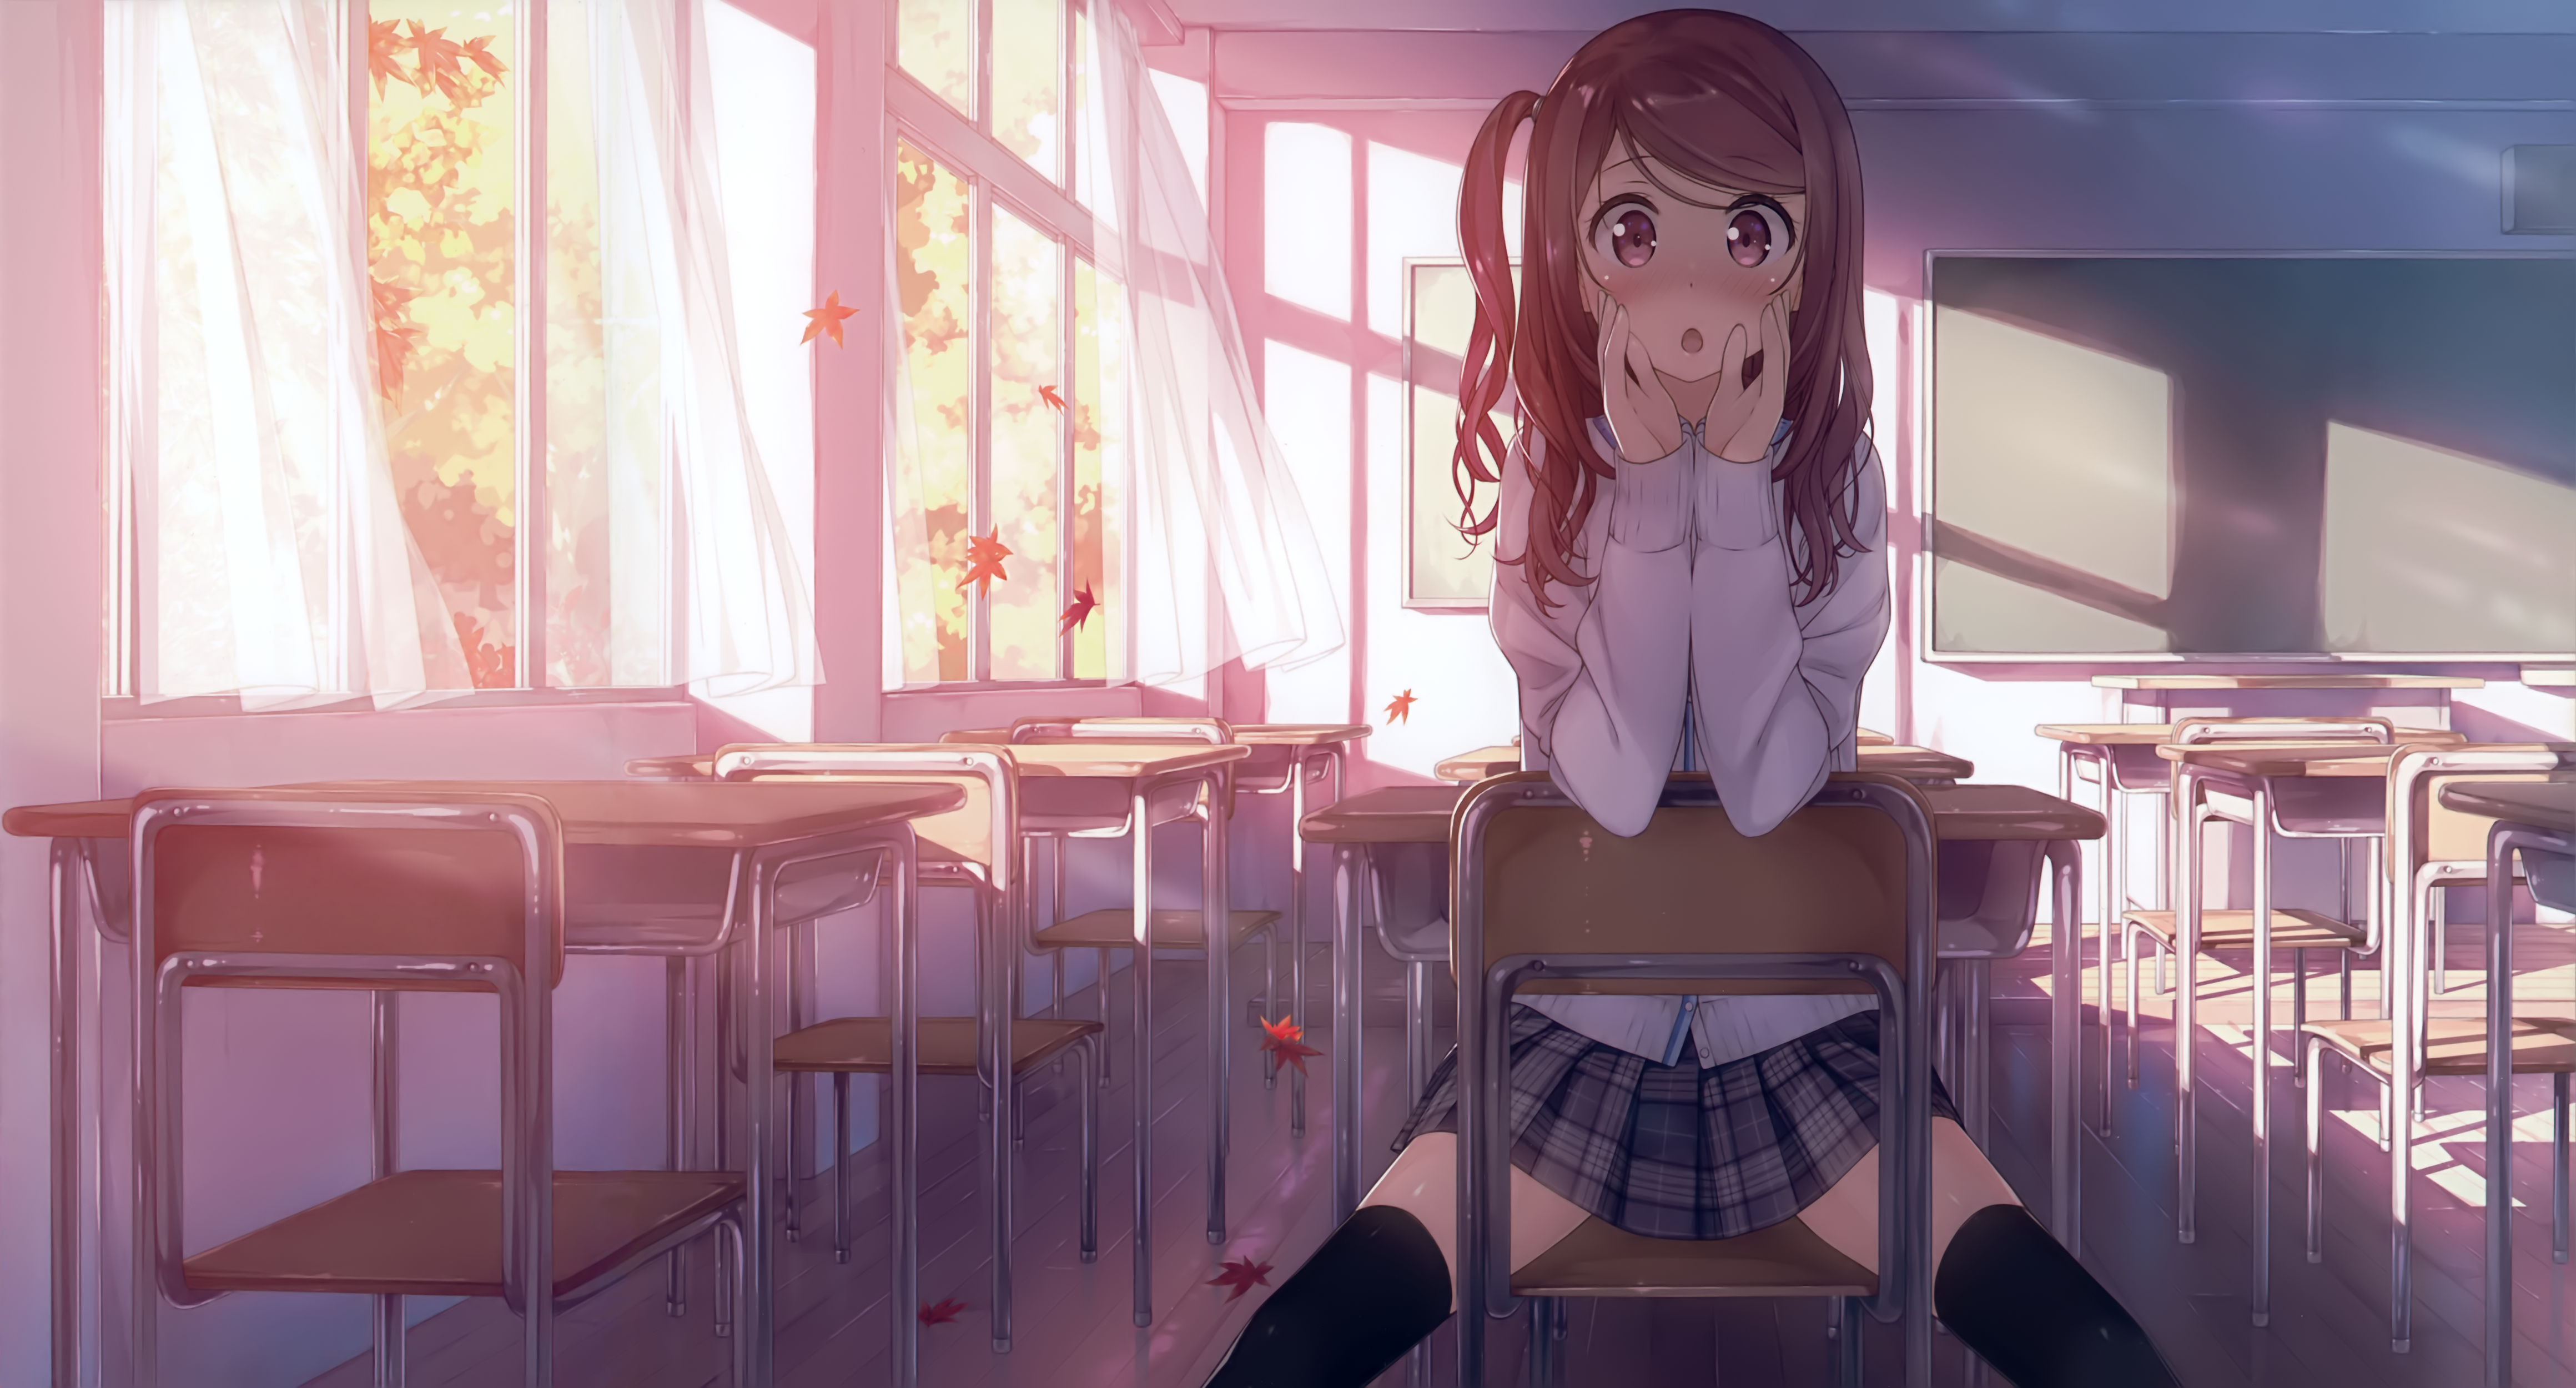 Anime Anime Girls Original Characters Frontal View Sitting Backwards Resting Head Indoors Classroom  4640x2500